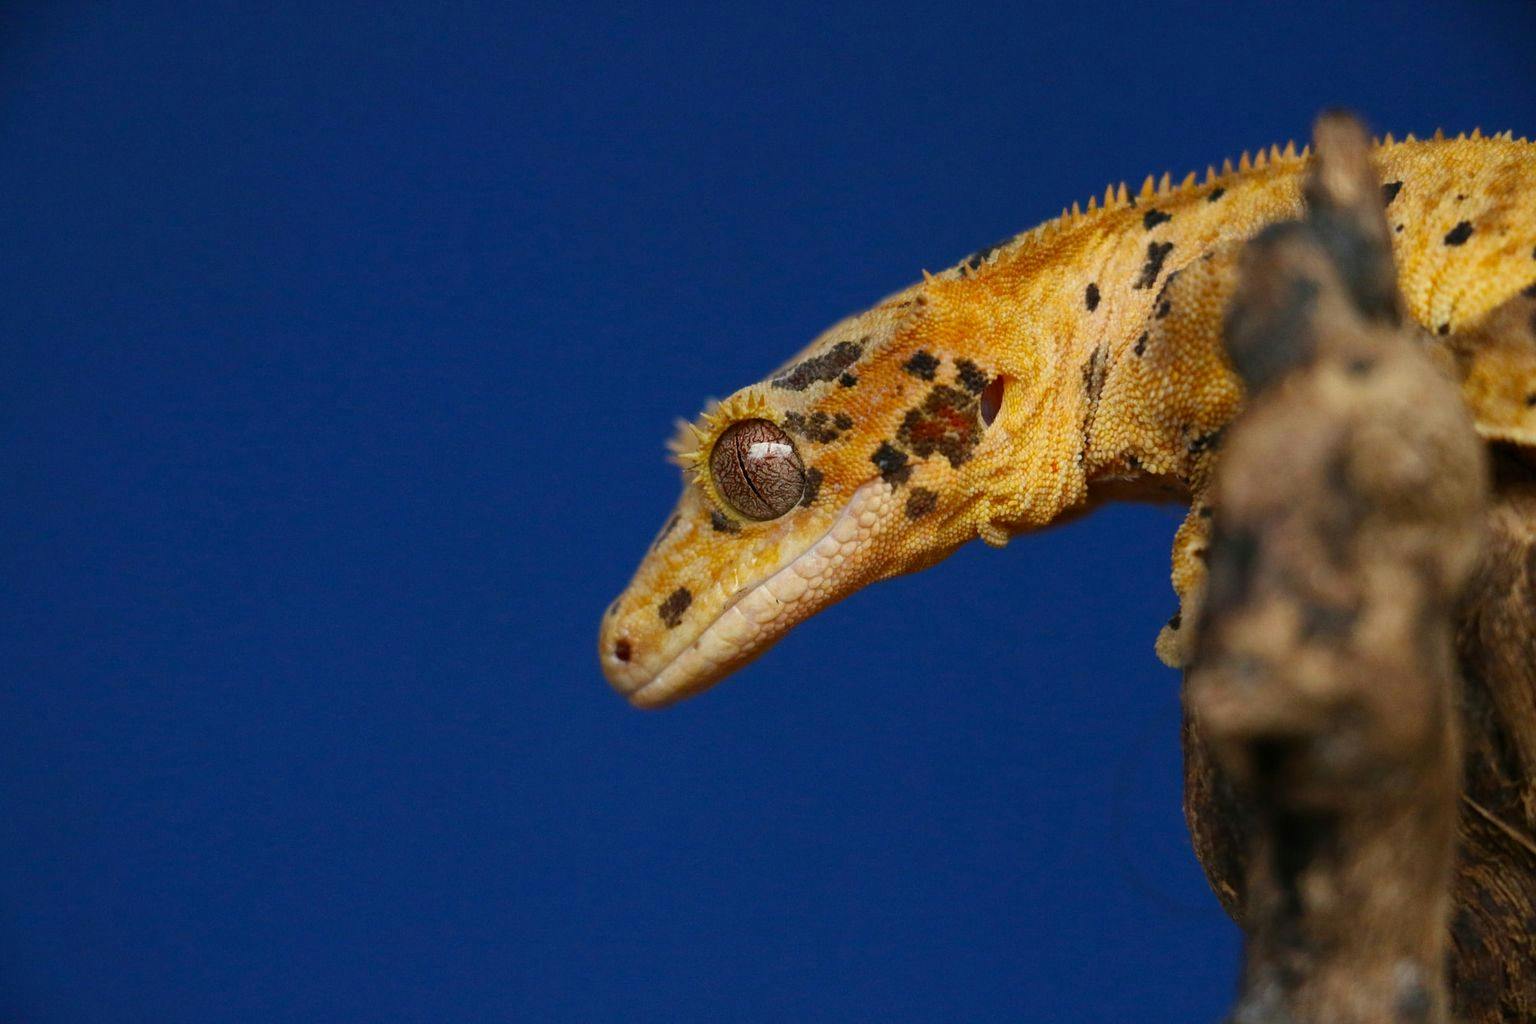 Crested geckos do best when fed an appropriate commercial diet, supplemented by feeder insects.